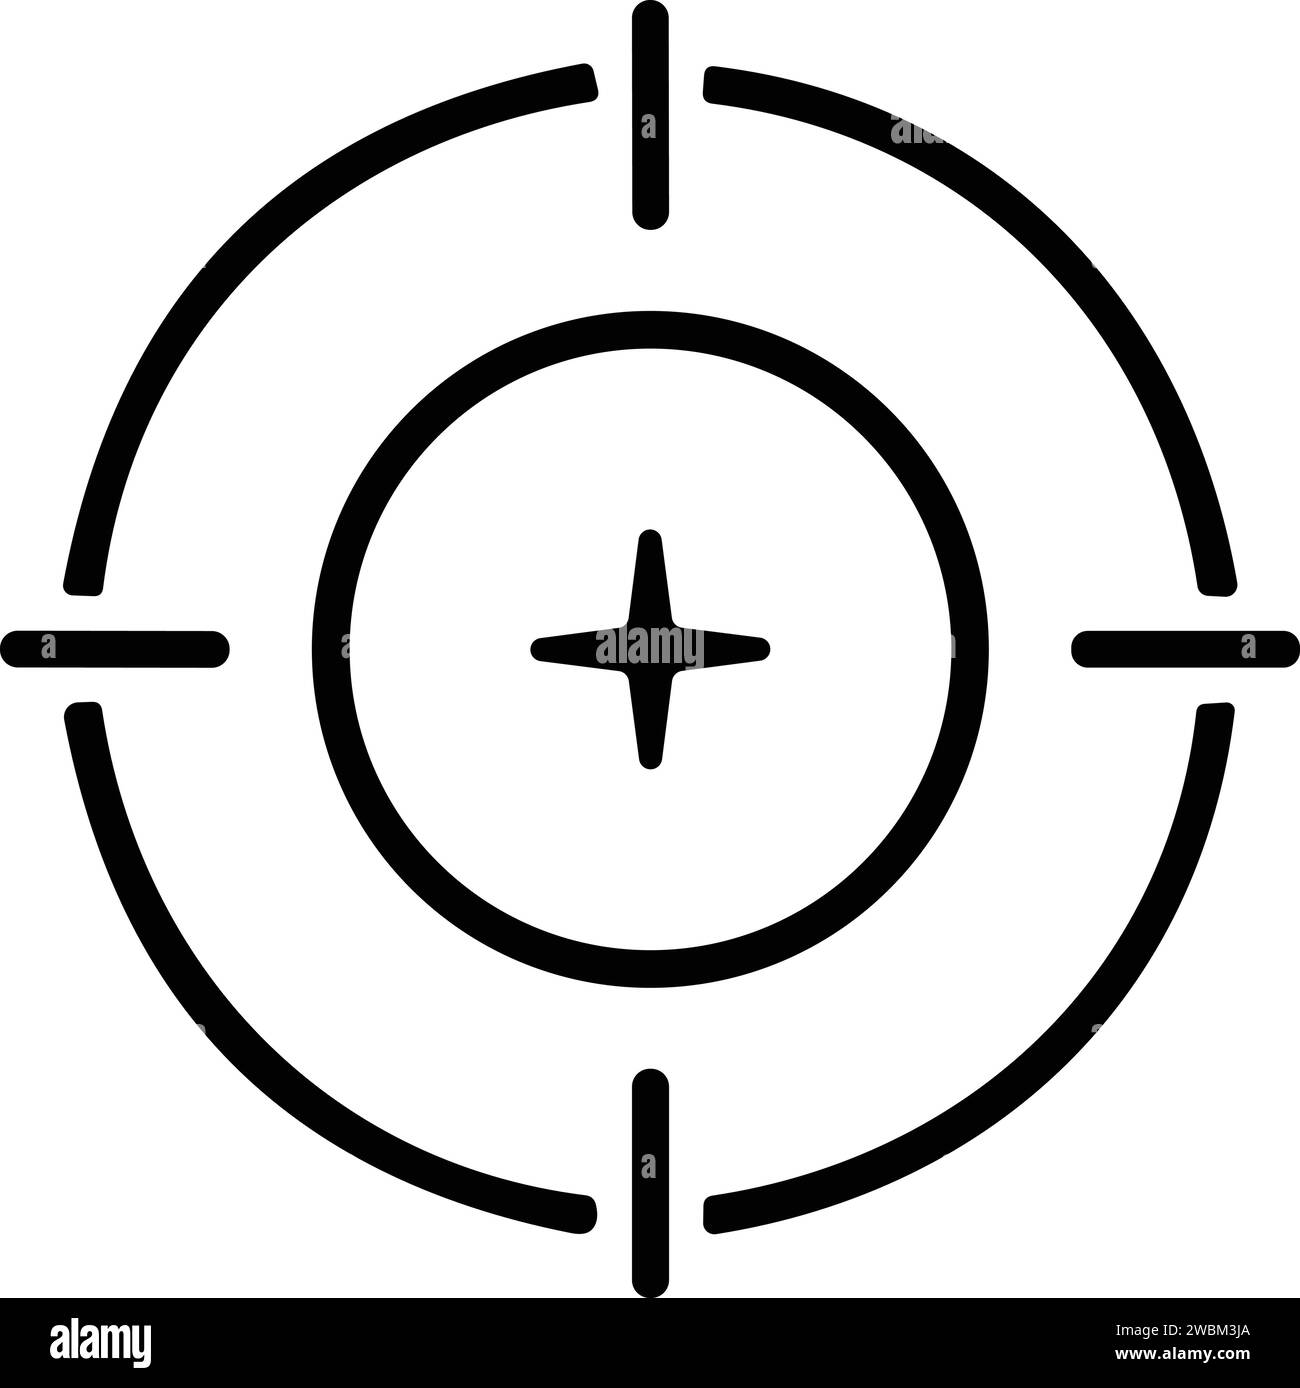 Target and destination. Target and aim, targeting and aiming. Crosshair, gun sight vector icon. Bullseye, black target or aim symbol. Military rifle s Stock Vector